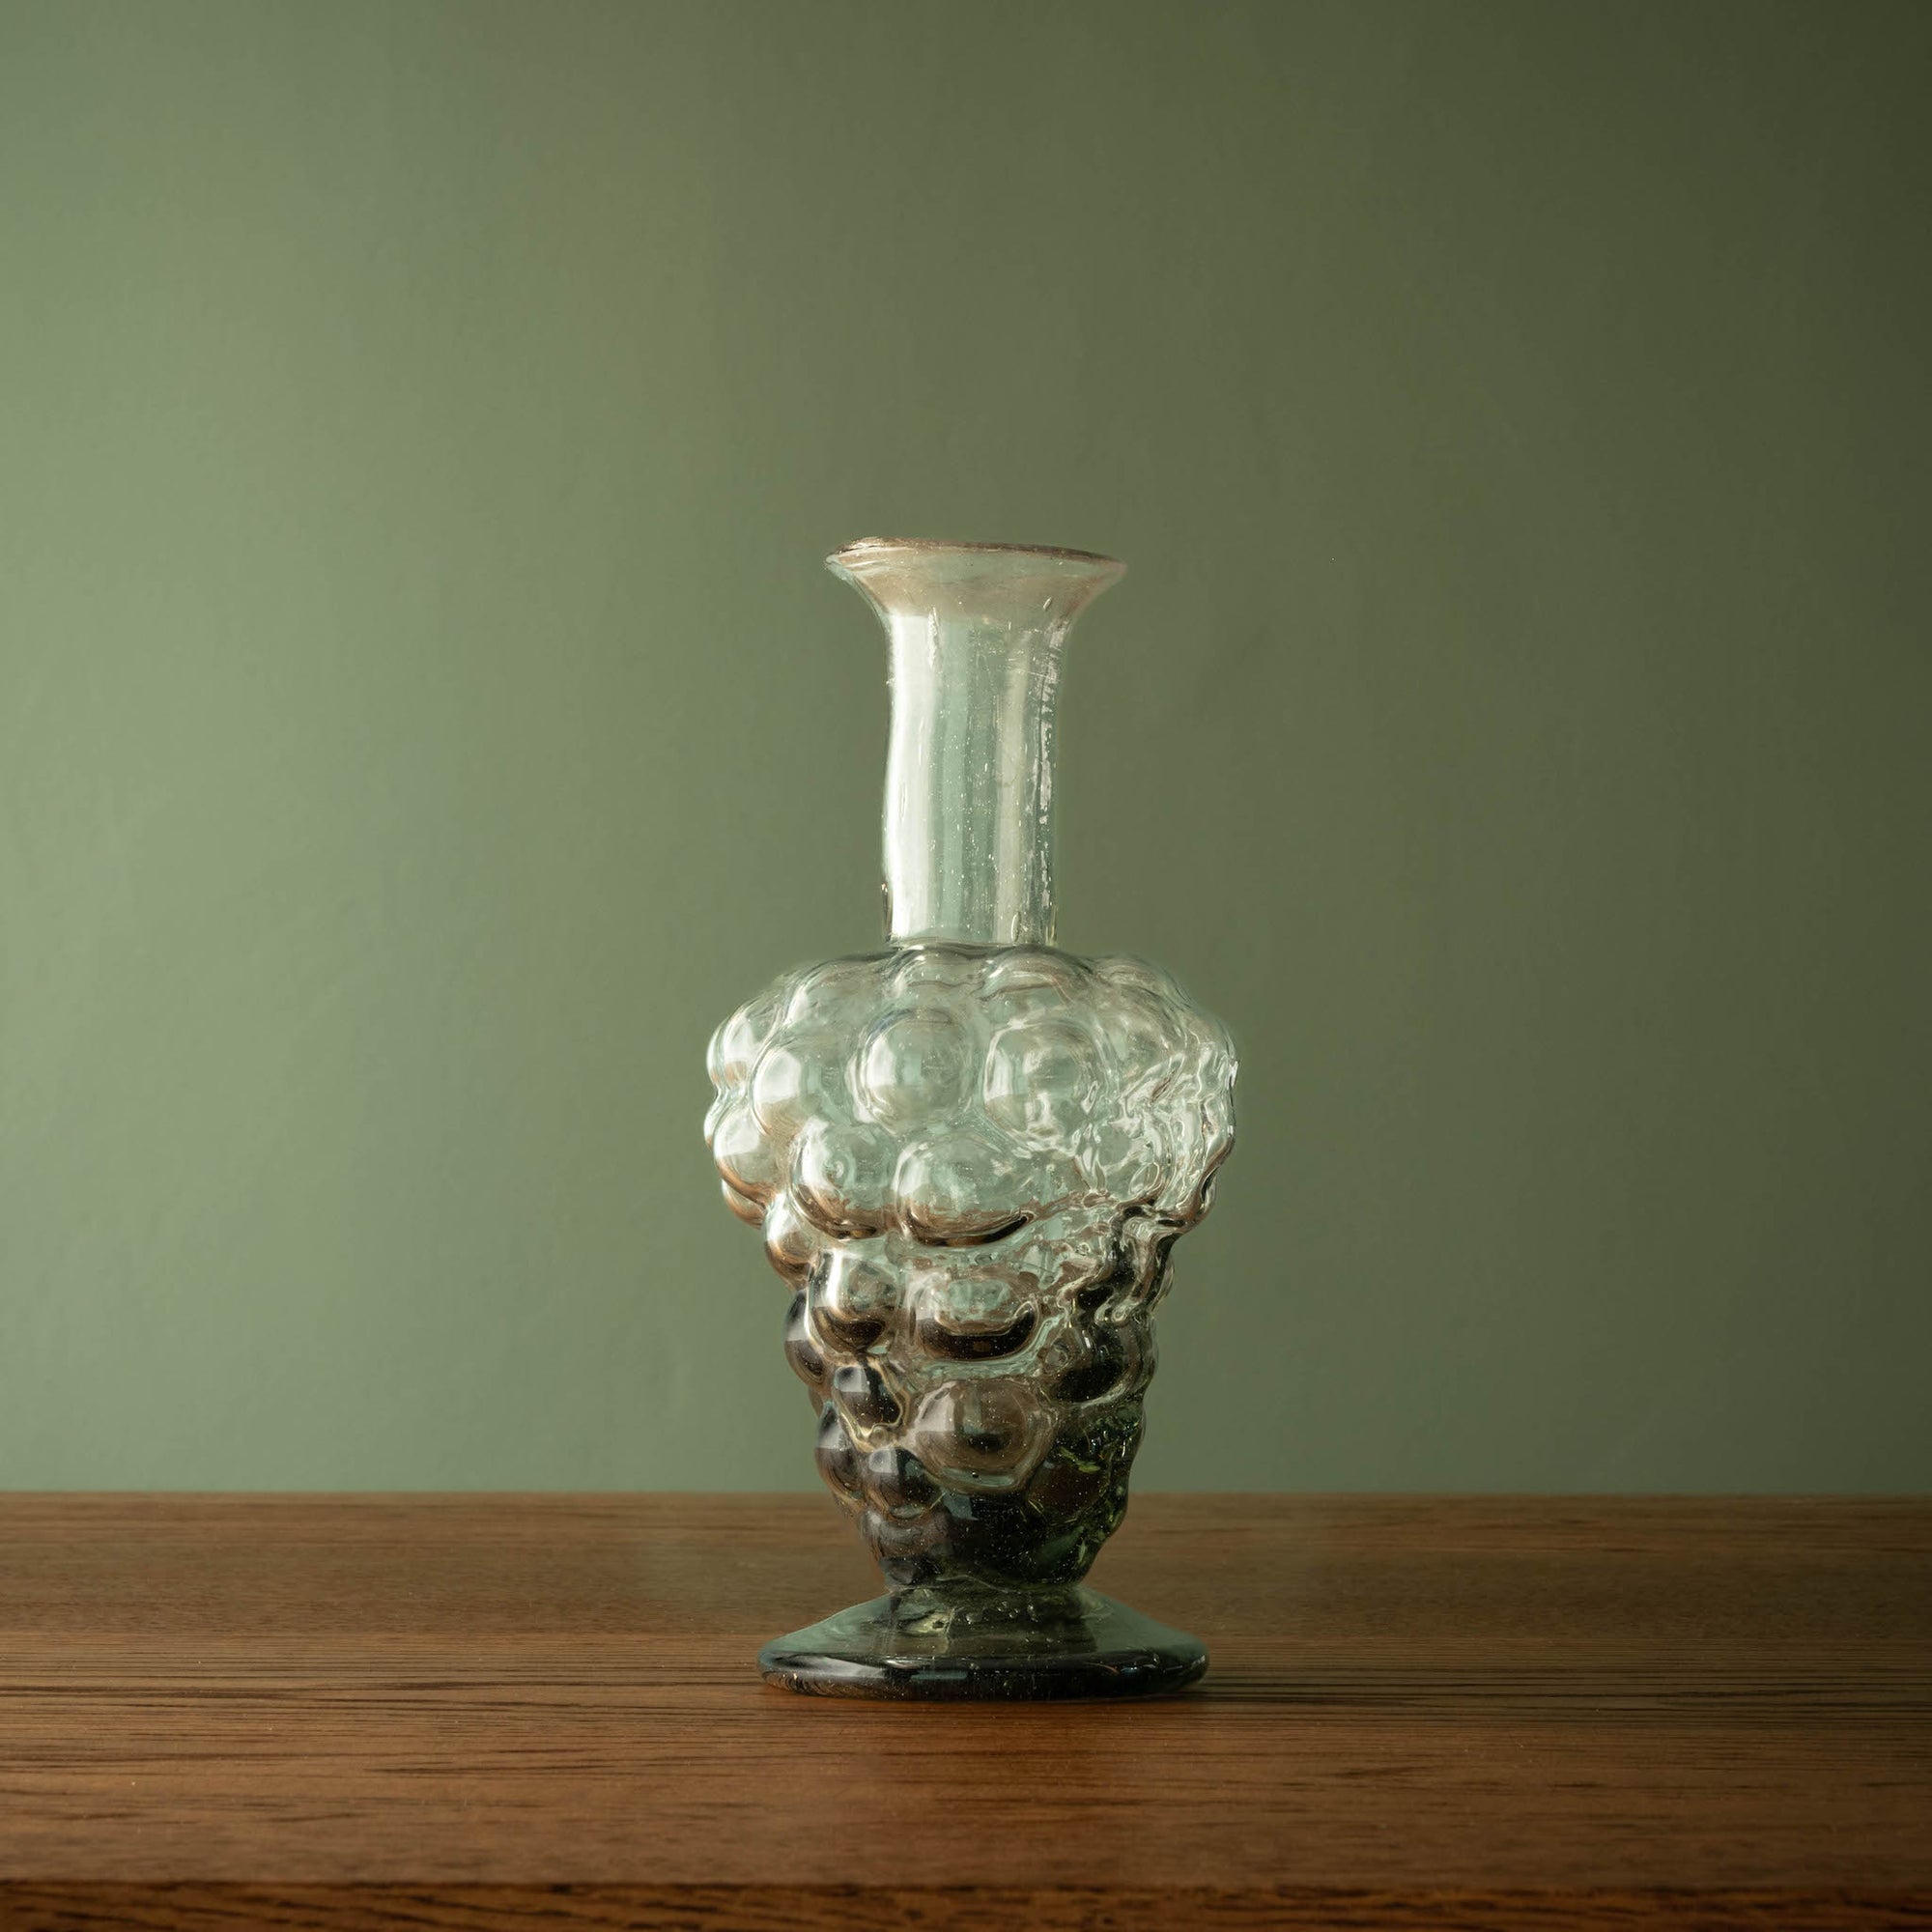 La Soufflerie Bacchus Vase  hand blown from recycled glass